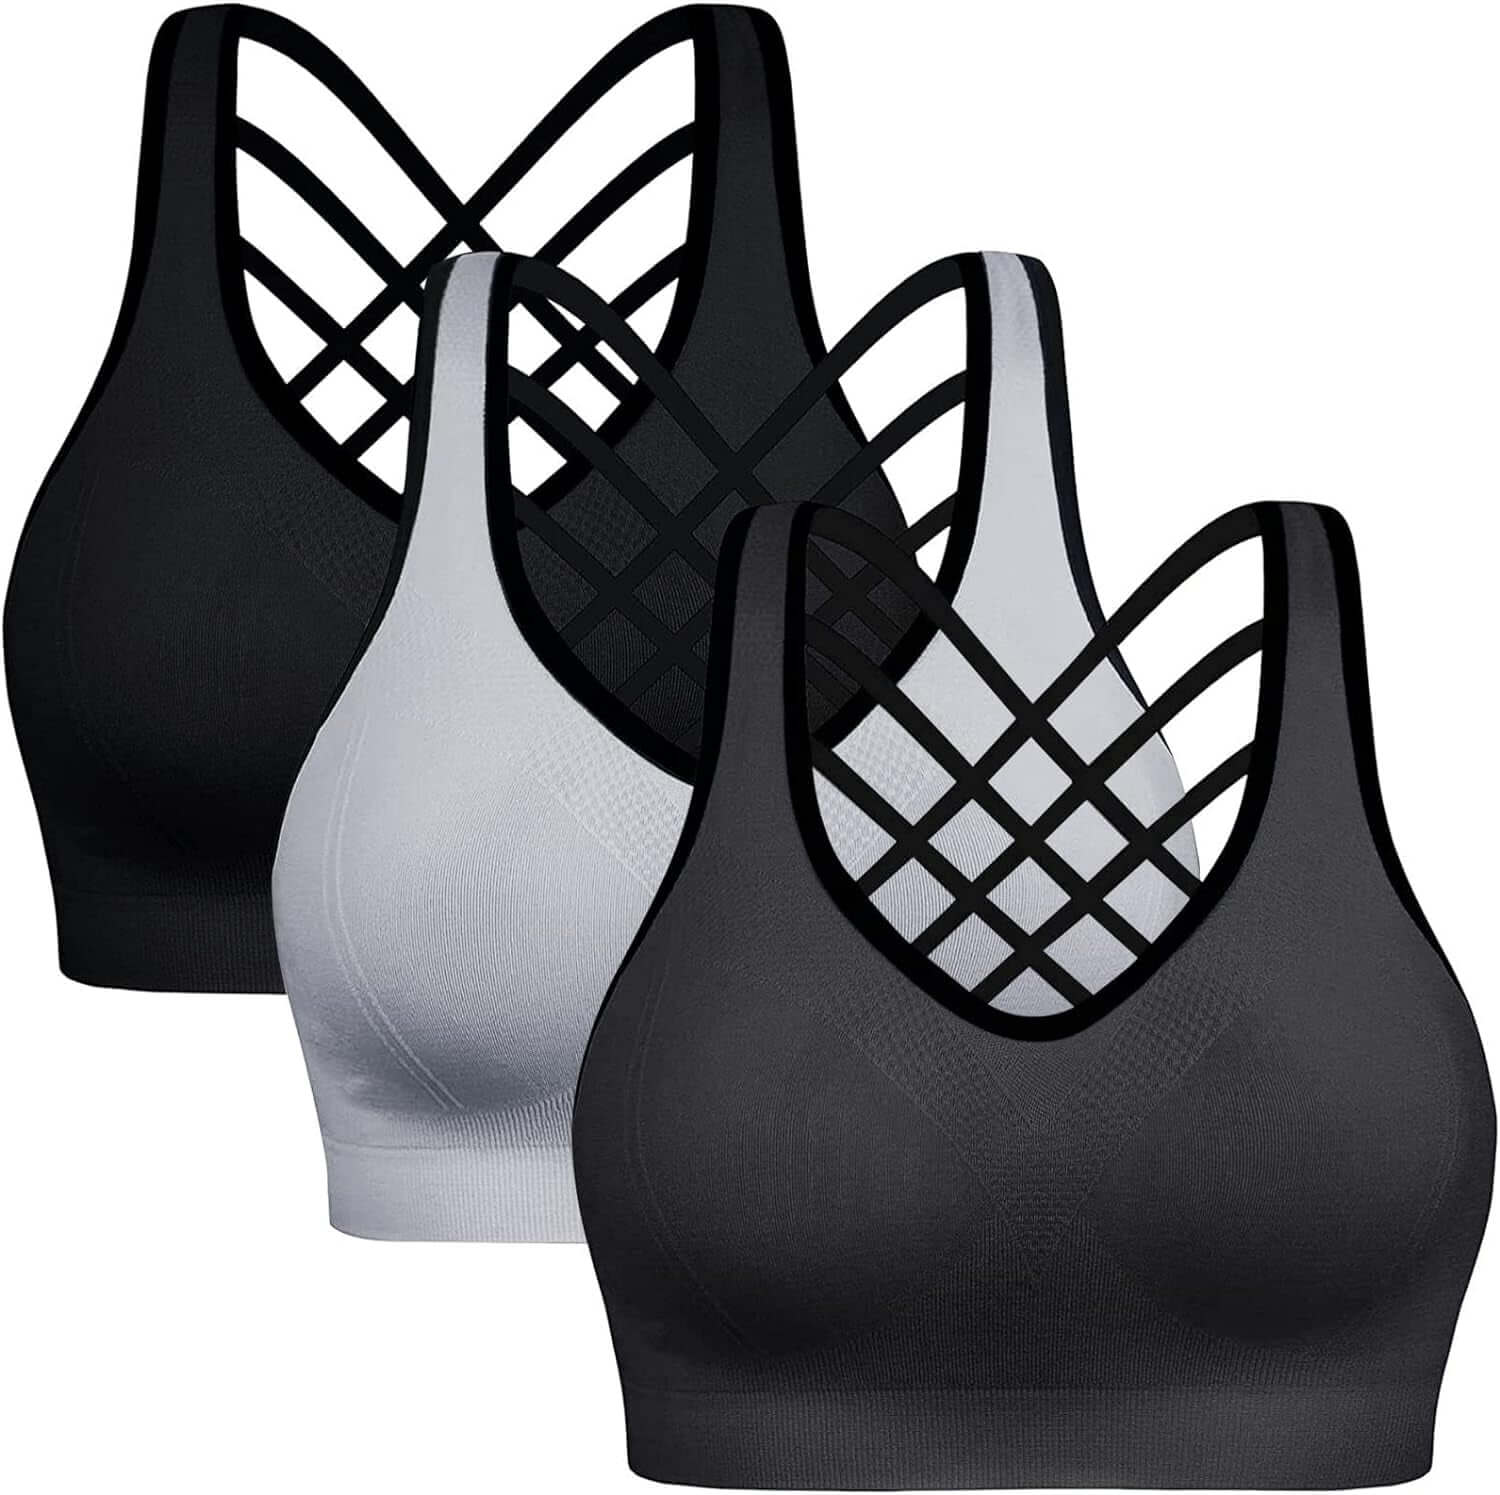 High Impact Sports Bras for Women High Support Adjustable Strappy Padded Sports Bra Workout Bras for Running